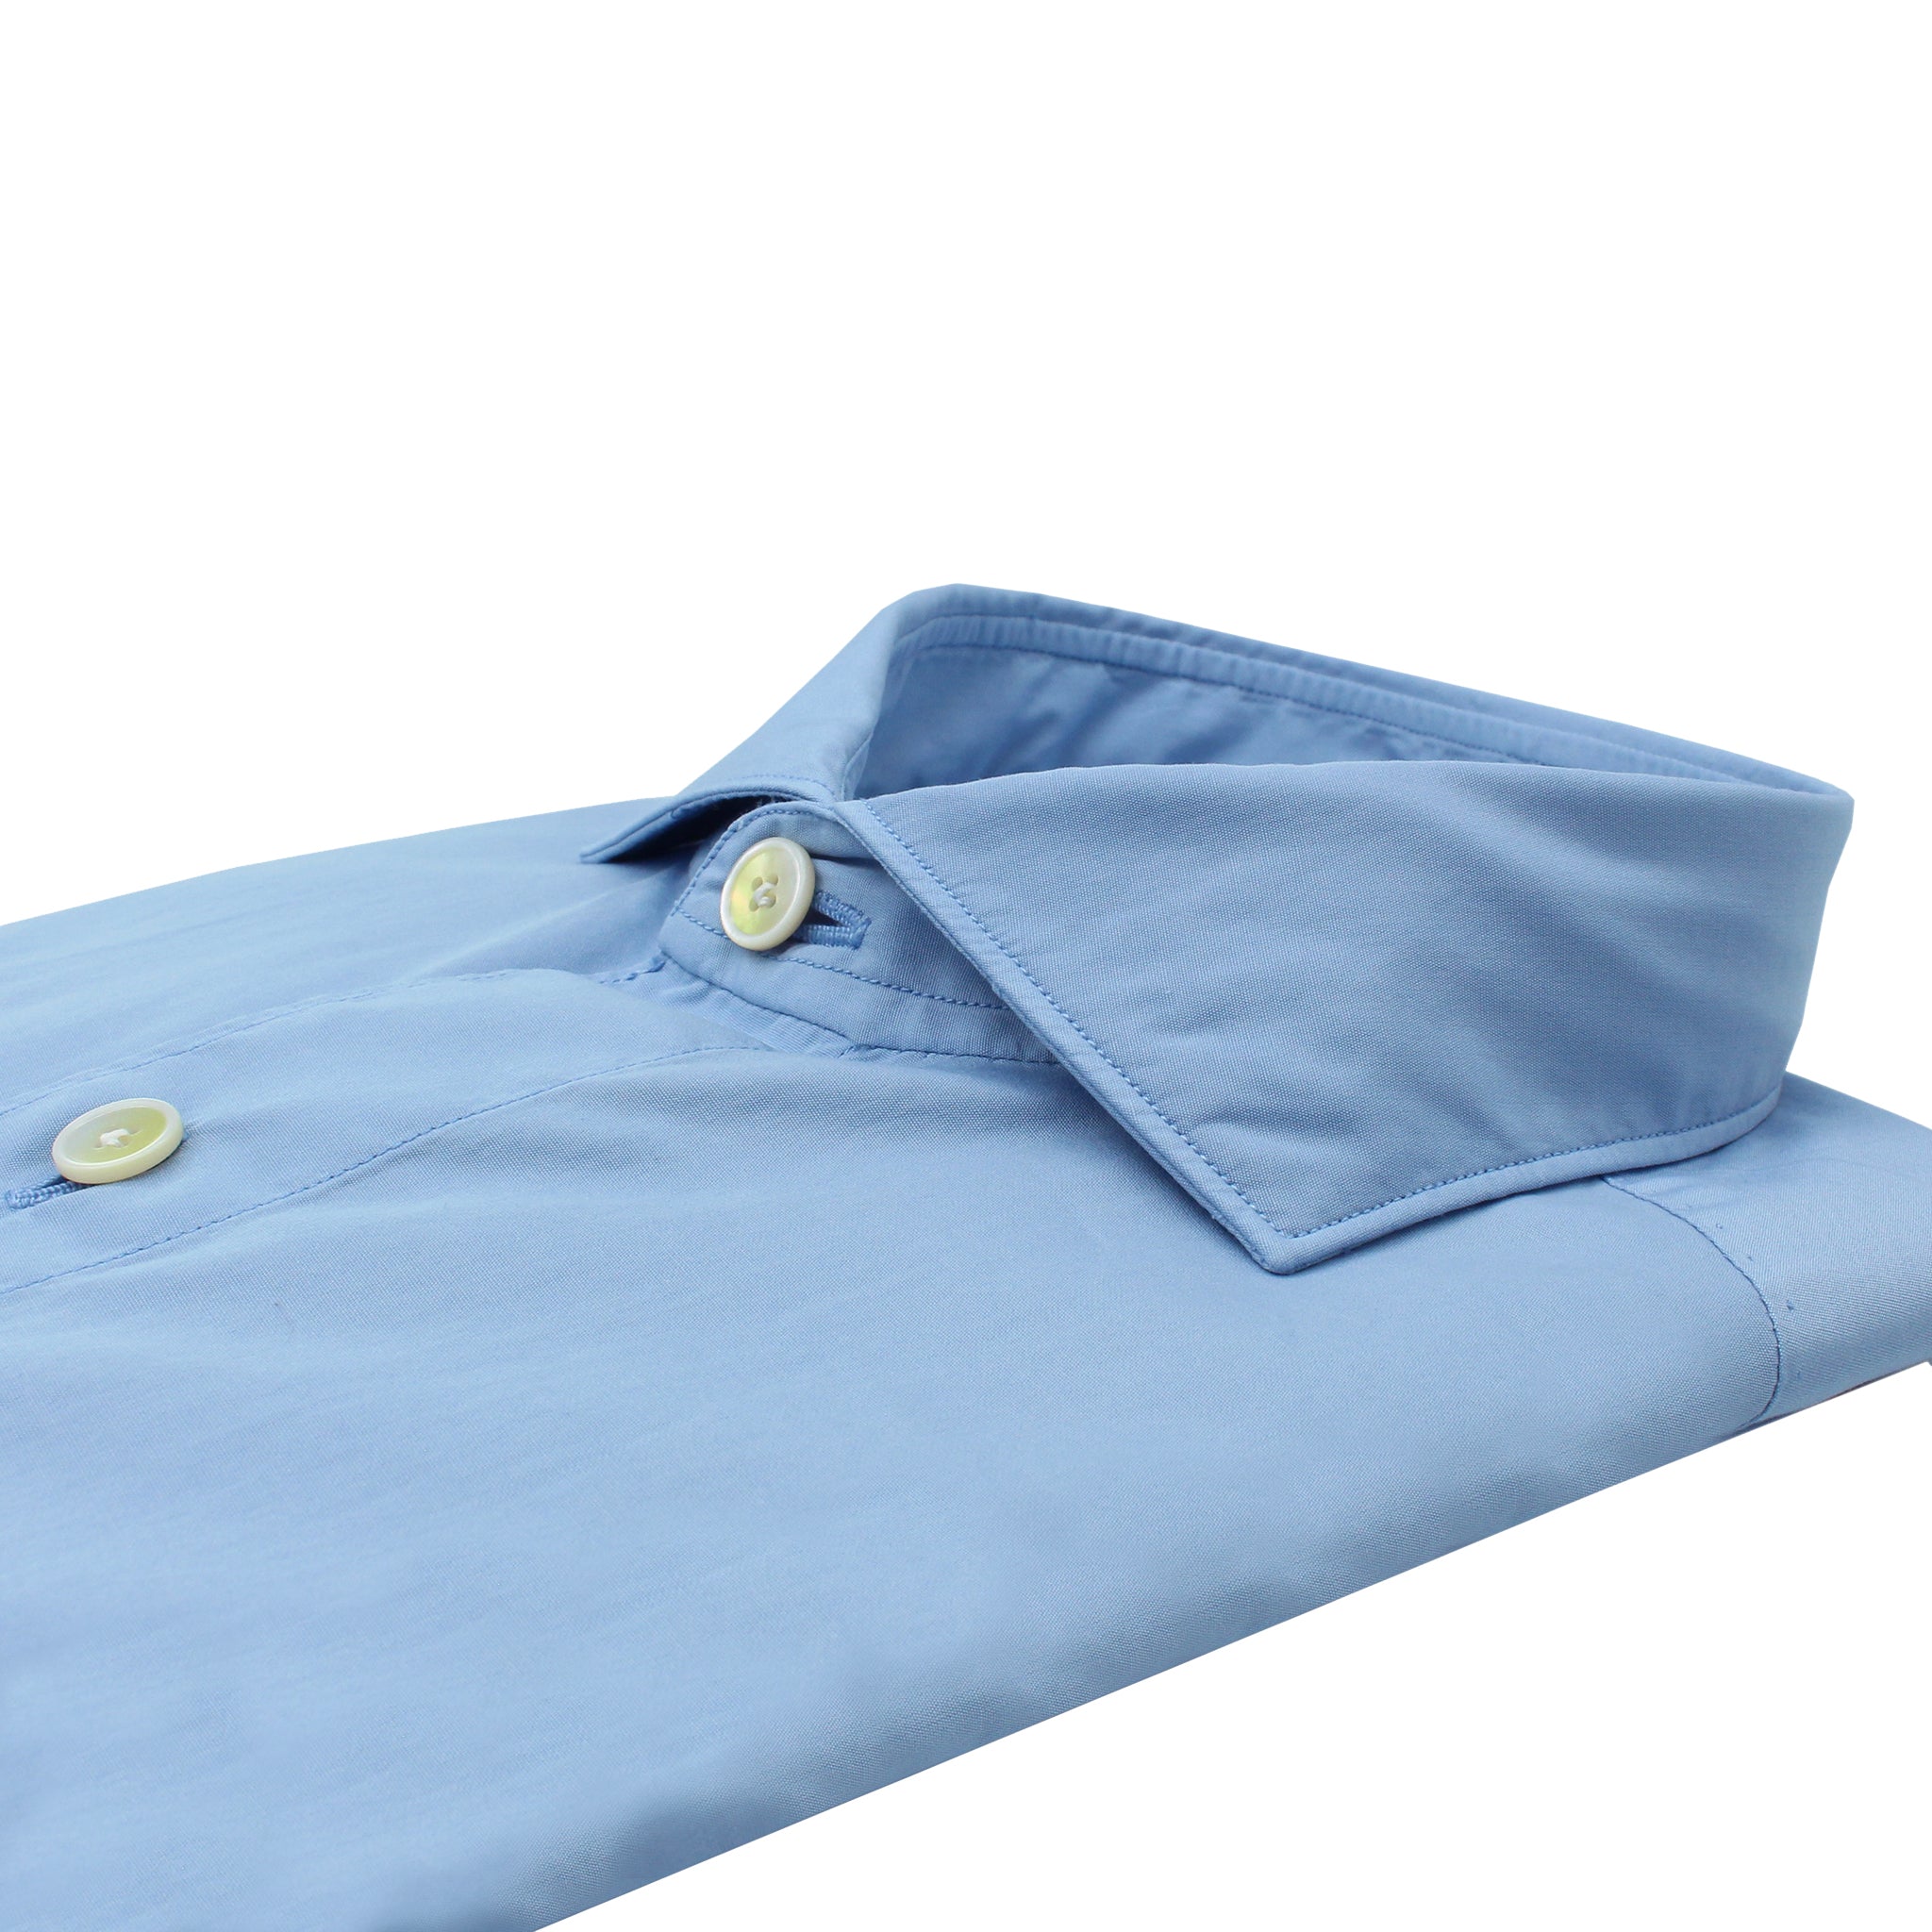 Classic Milano slim fit shirt in light blue cotton